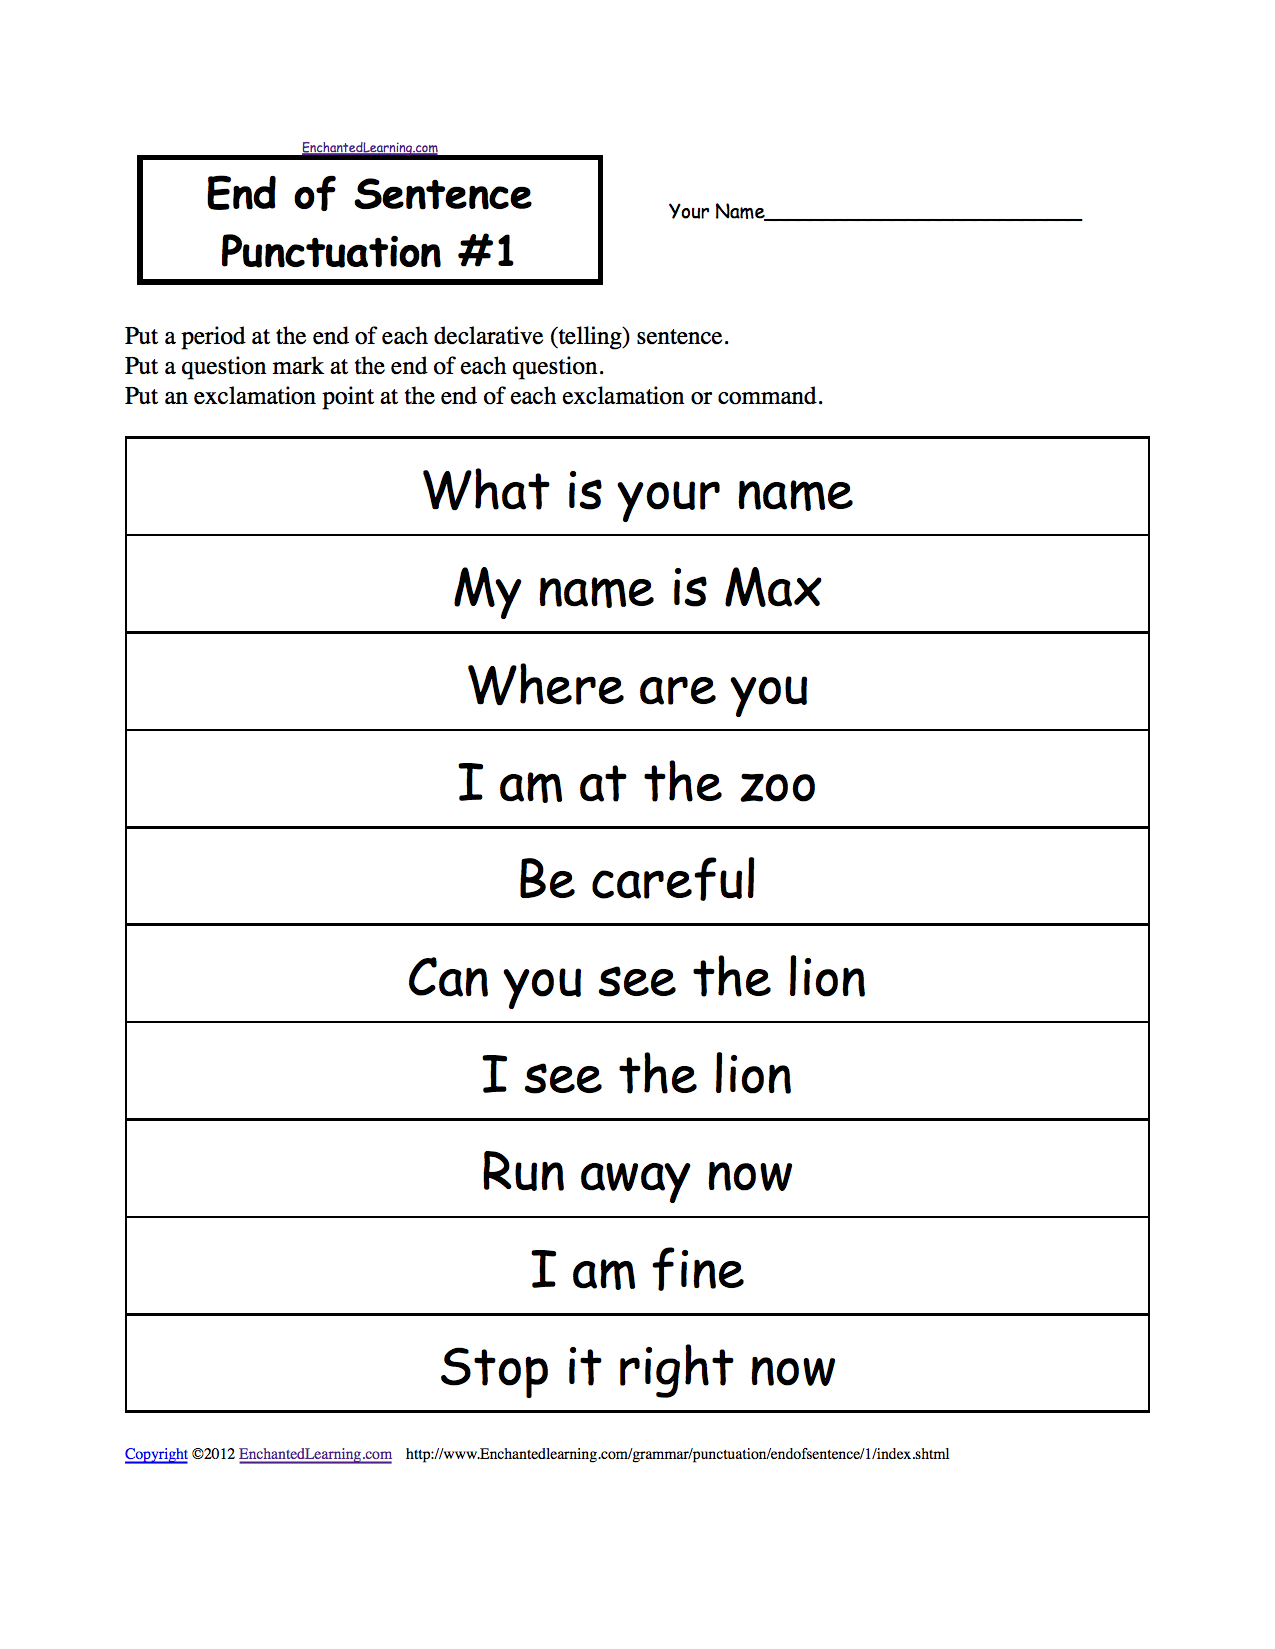 Punctuation Marks: Enchantedlearning - Free Printable Worksheets For Punctuation And Capitalization